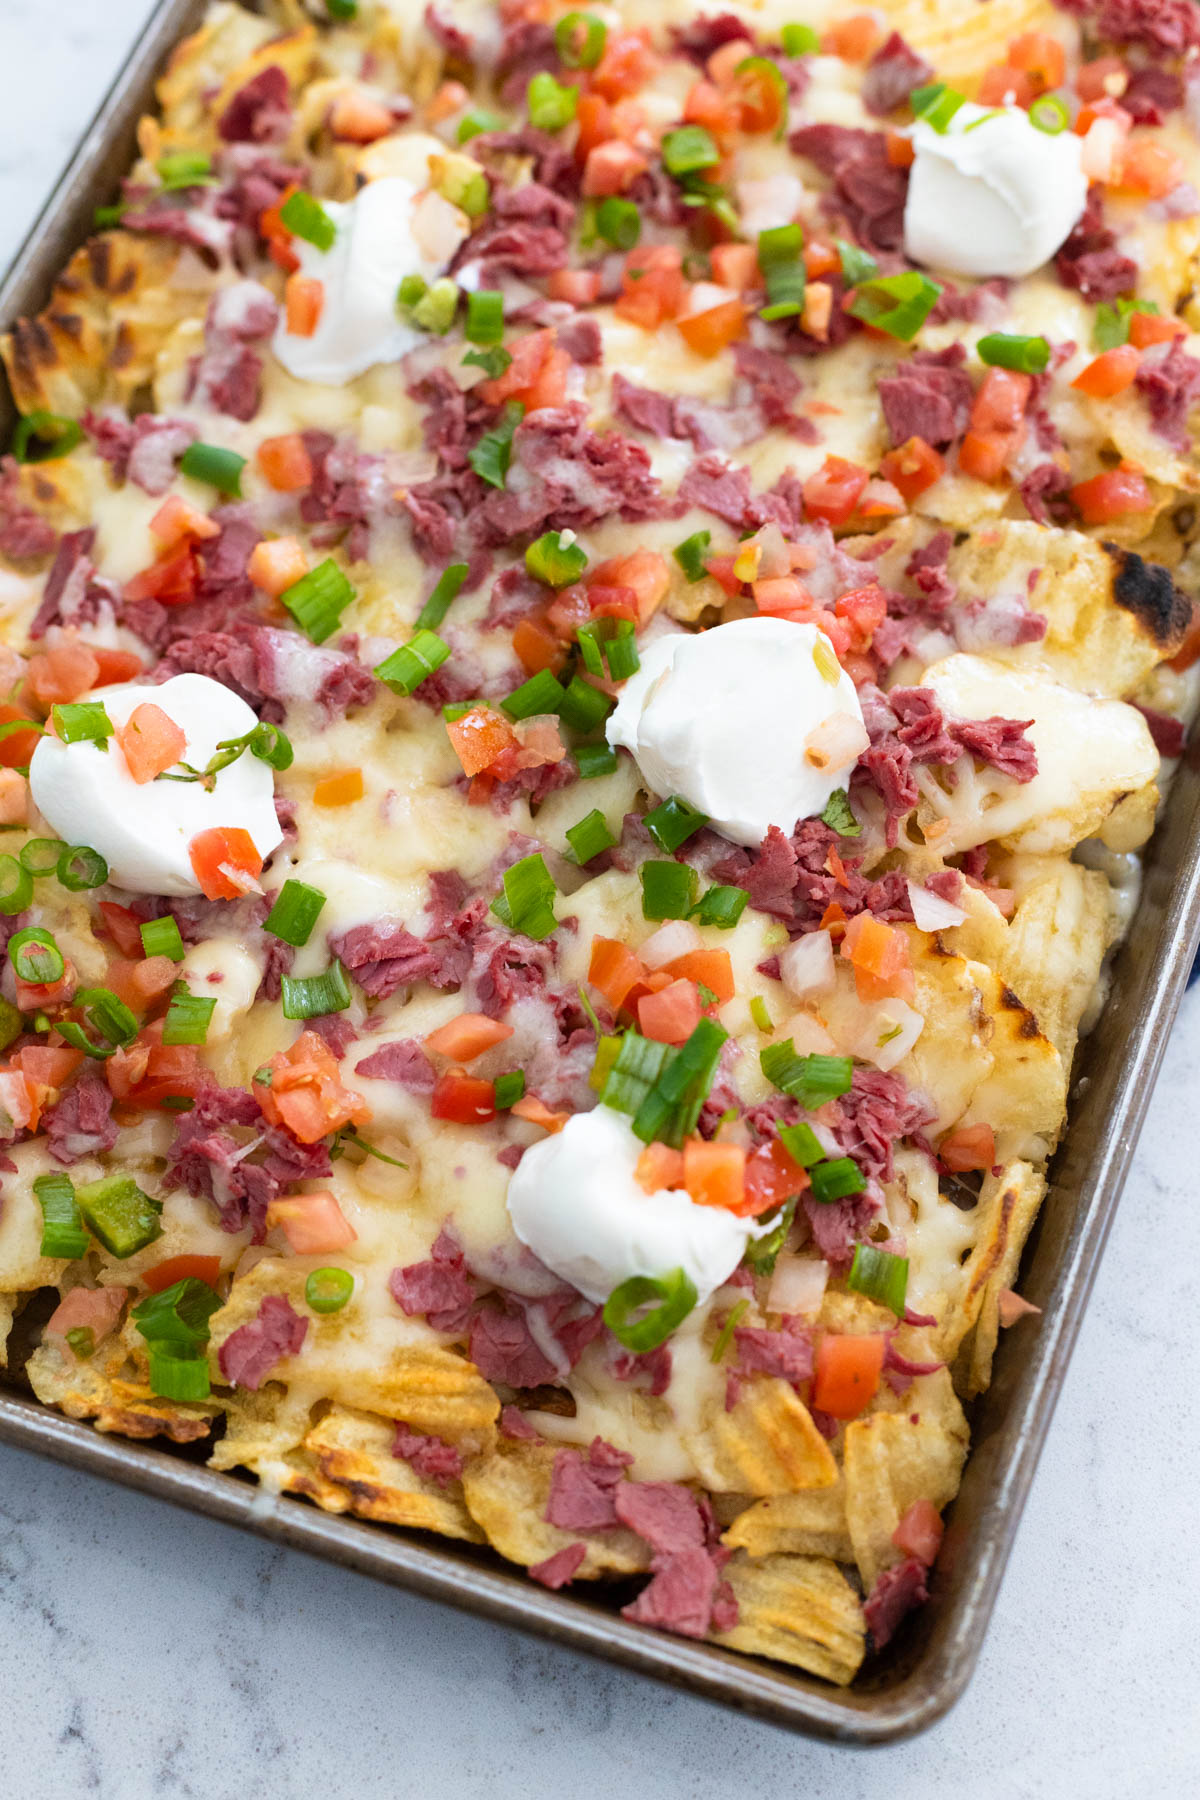 The pan of Irish nachos has been topped with sour cream, pico de gallo and green onions.